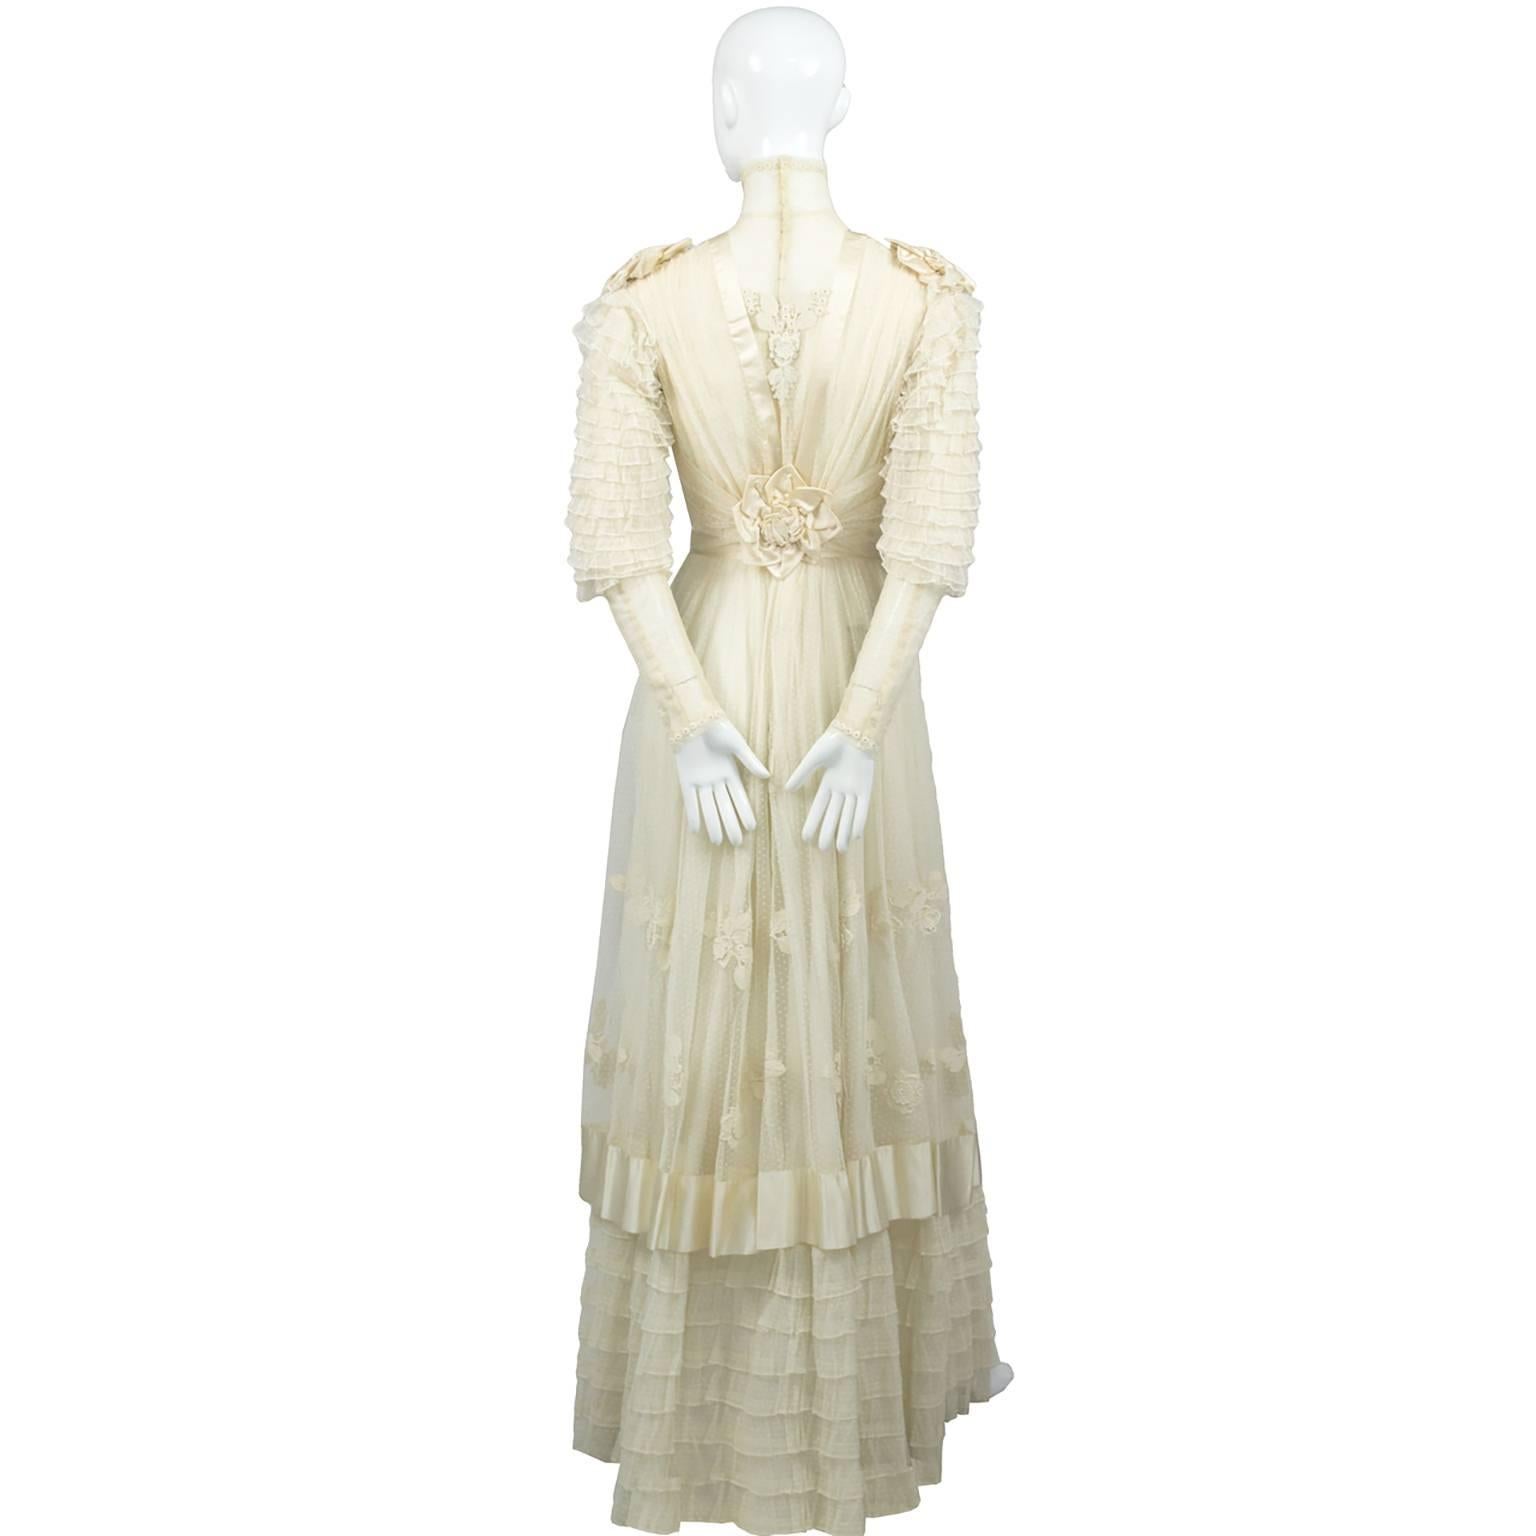 This is an exceptional Antique lace and netting Edwardian vintage wedding dress with short matching veil. The dress is made of creamy dotted fine netting with lace appliques, silk roses and silk trim. The high neck is made of the fine netting, the